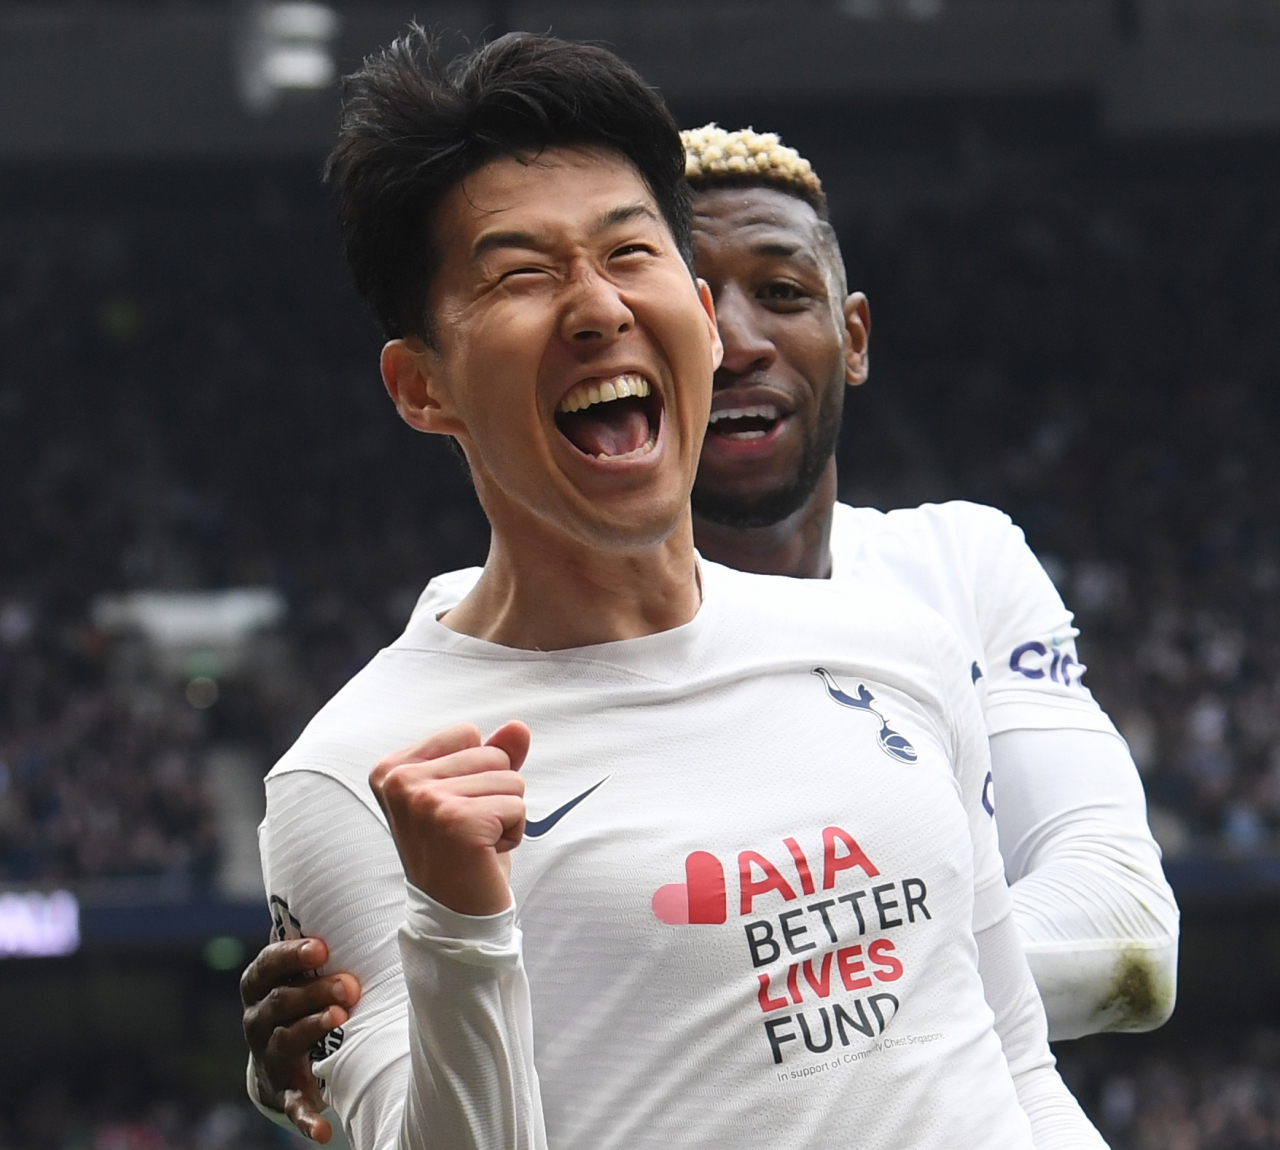 In this EPA photo, Son Heung-min of Tottenham Hotspur (L) celebrates his goal against Leicester City during the clubs' Premier League match at Tottenham Hotspur Stadium in London on Sunday. (EPA)